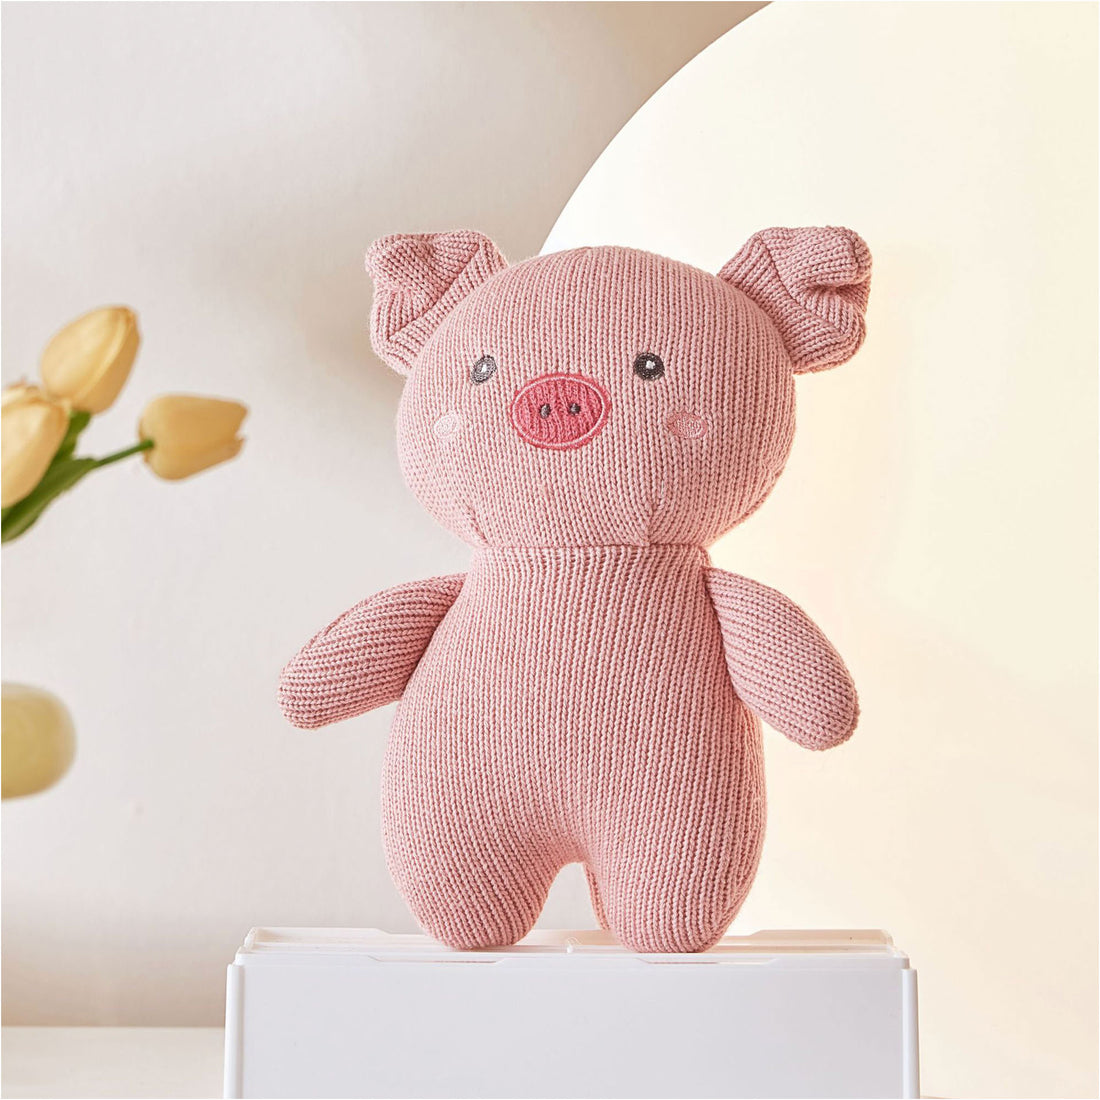 A close-up photo of a pink knitted piggy sitting on a white box. The teddy bear has black button eyes and a stitched smile. It has a black embroidered nose and a small pink patch on its chest.